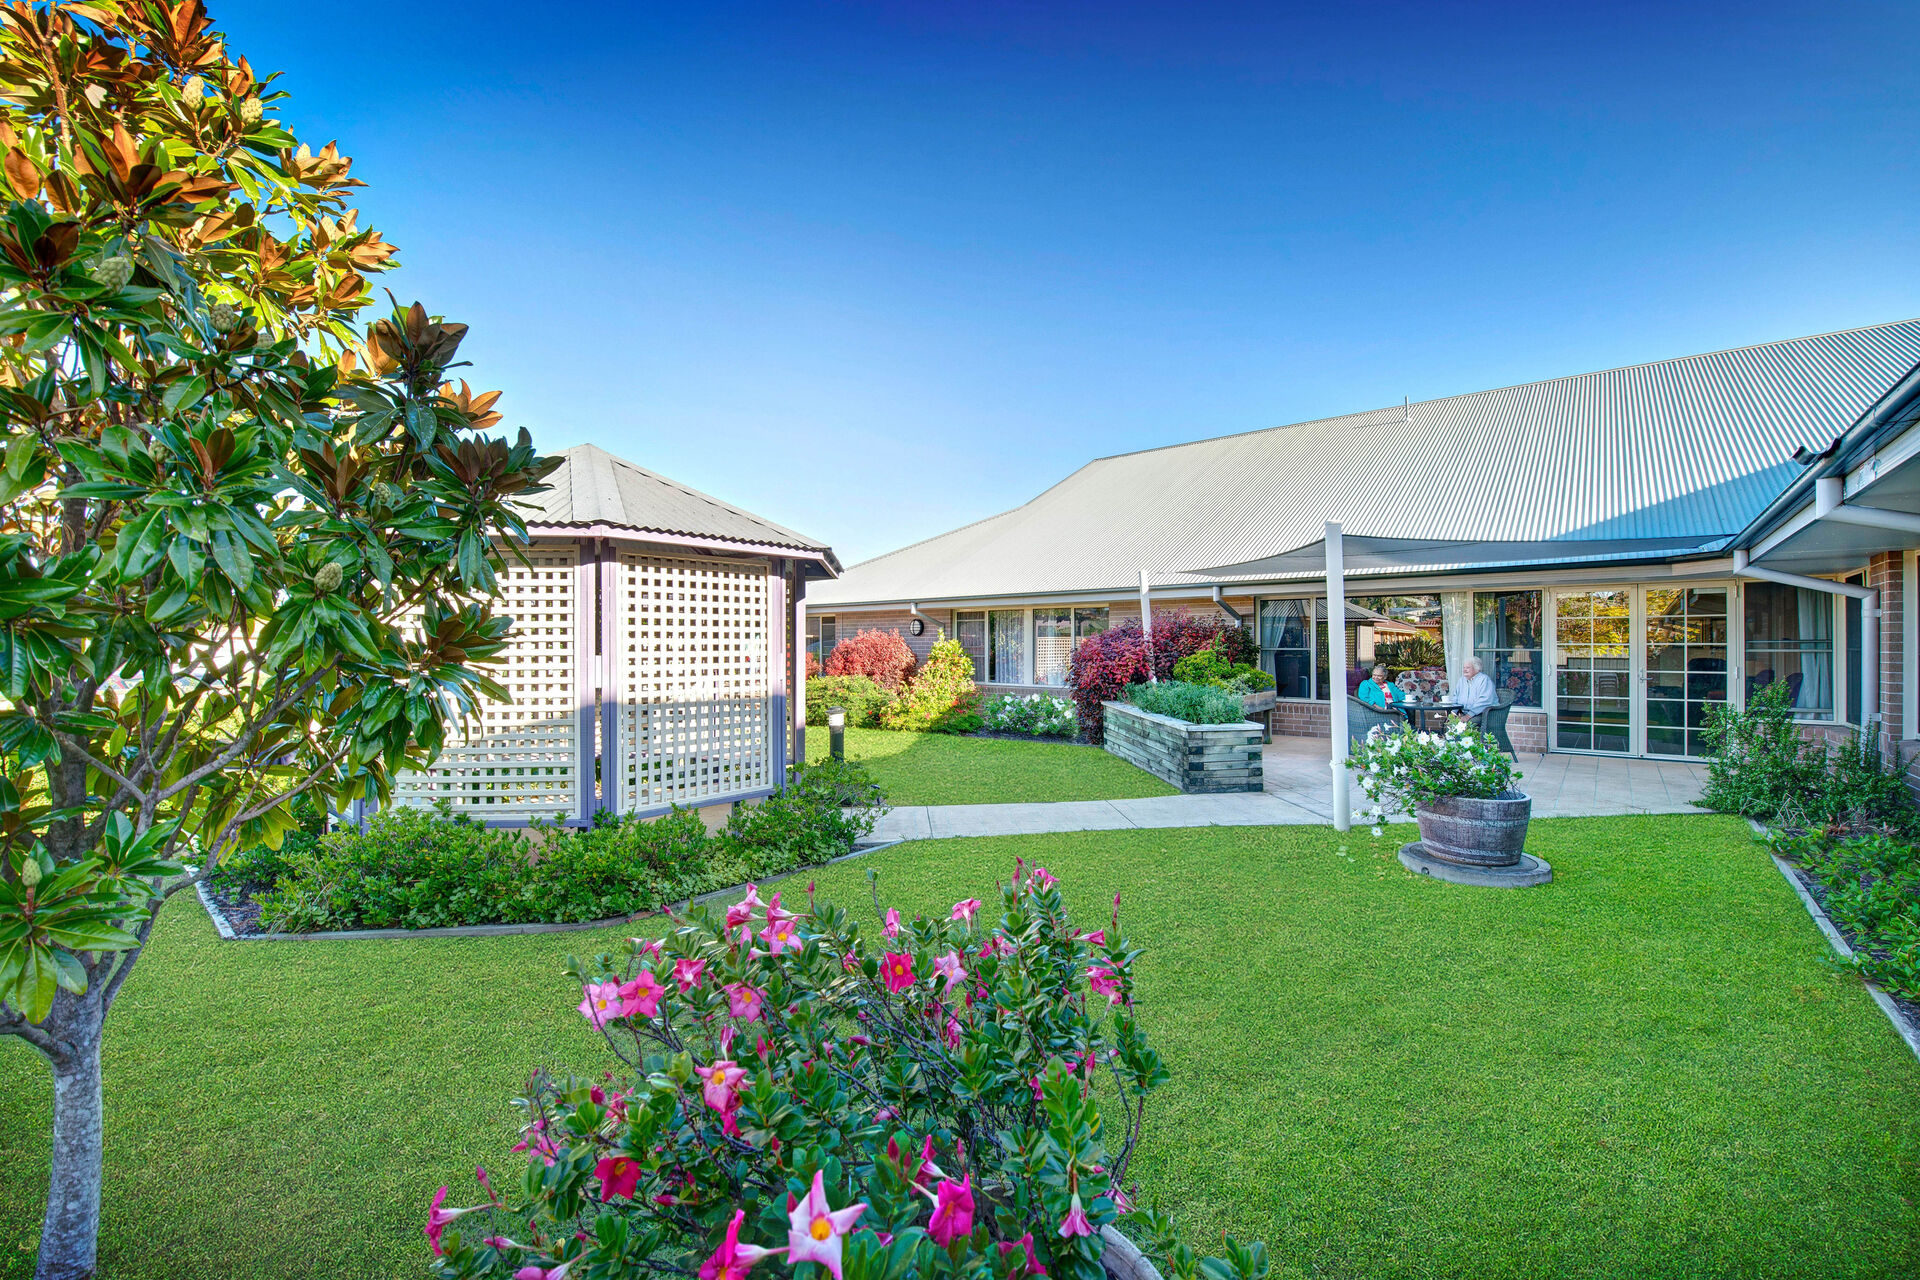 outdoor gardens for aged care residents to walk around and explore at BaptistCare Kularoo centre aged care home in forster nsw